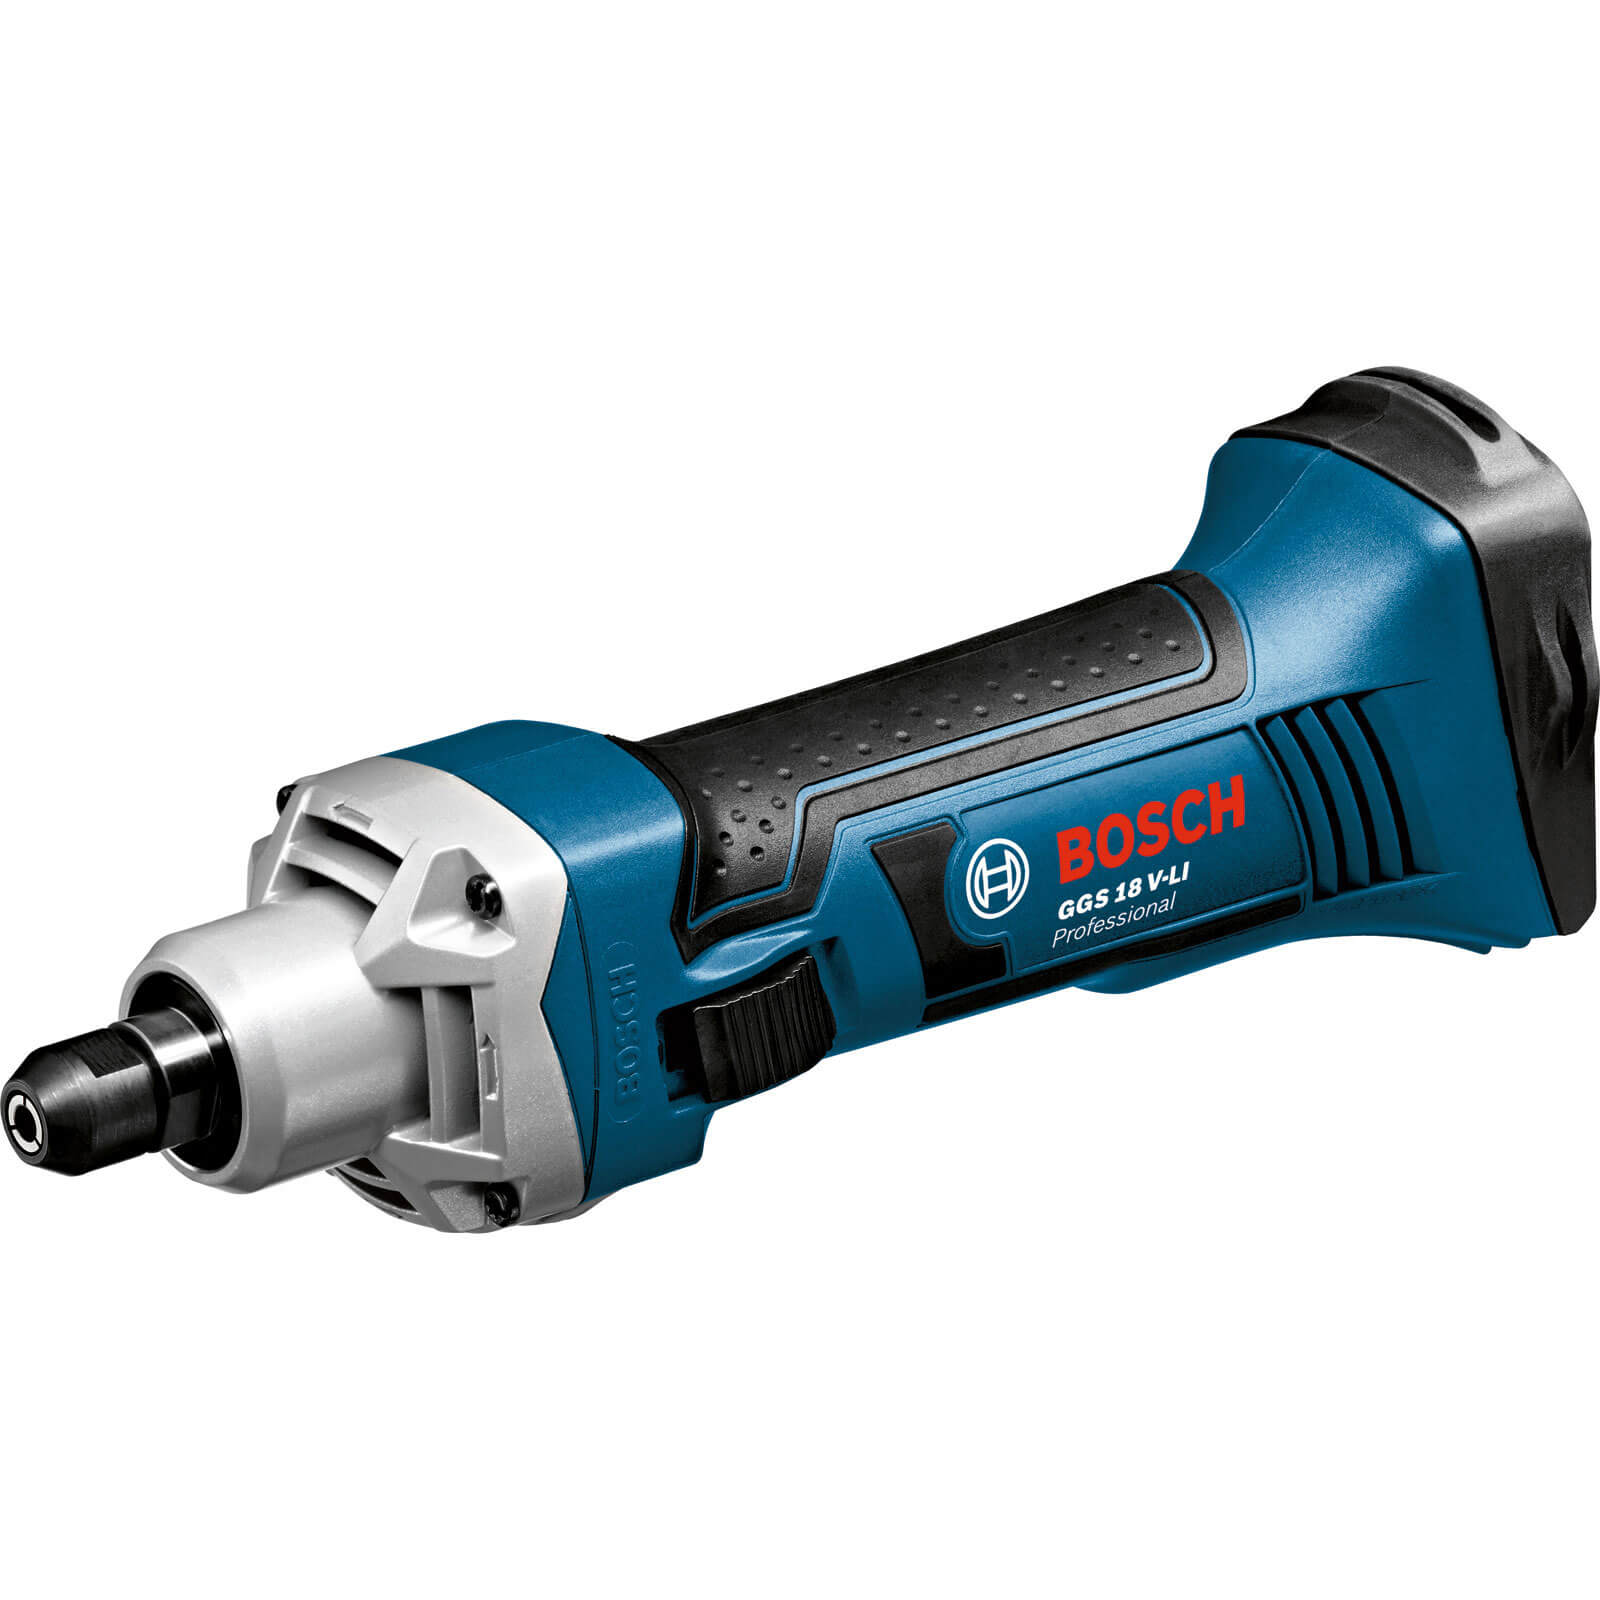 Bosch GGS 18V-LI 18v Cordless Die Grinder without Battery or Charger